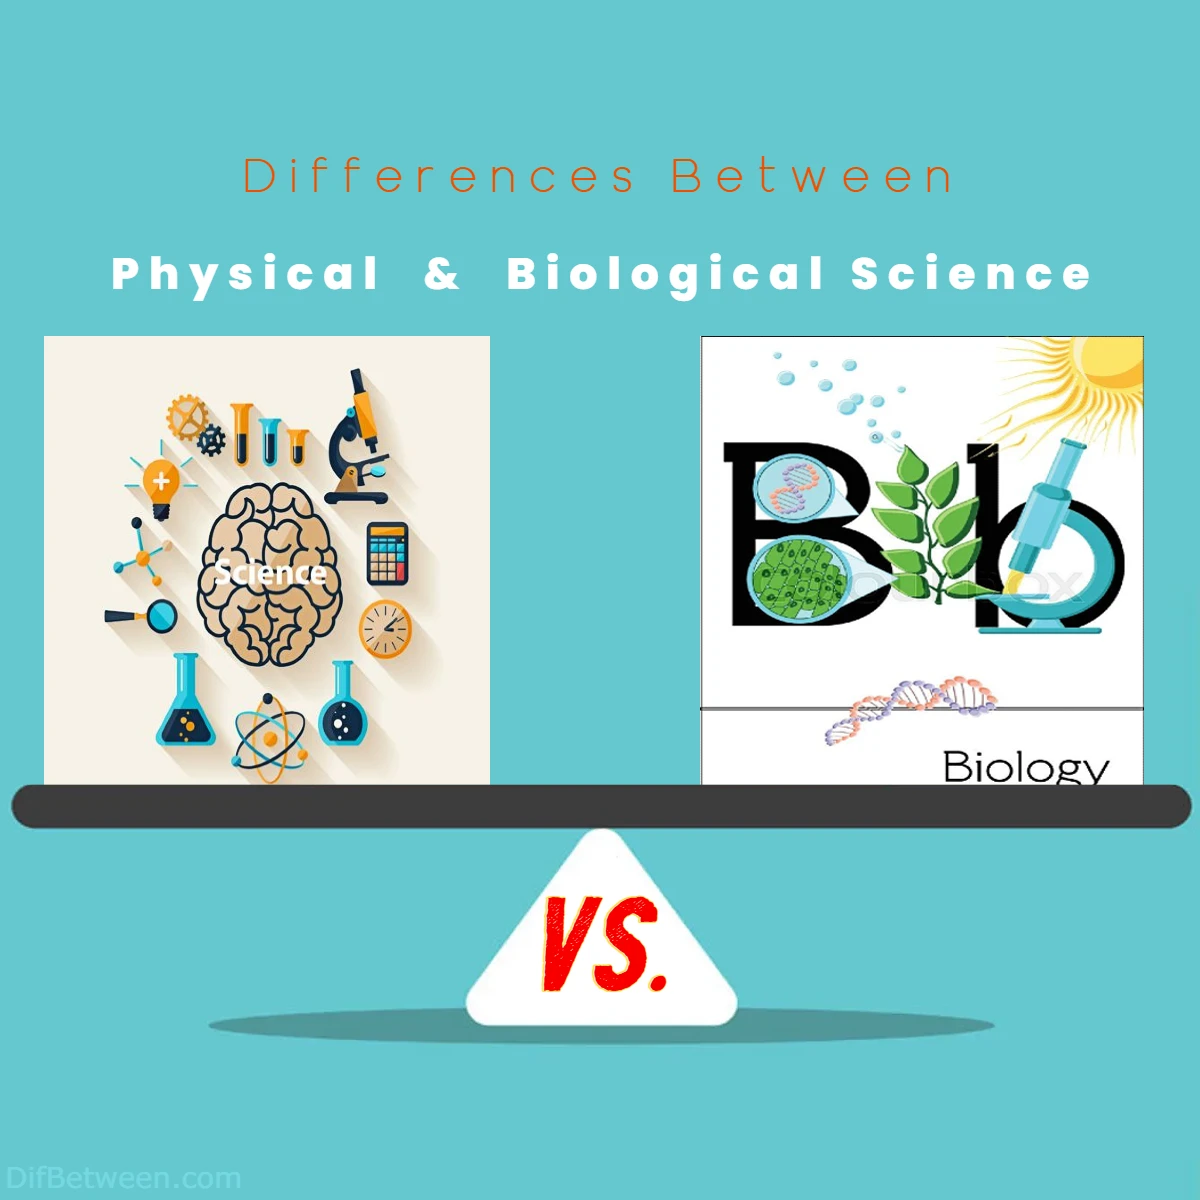 Differences Between Physical vs Biological Science